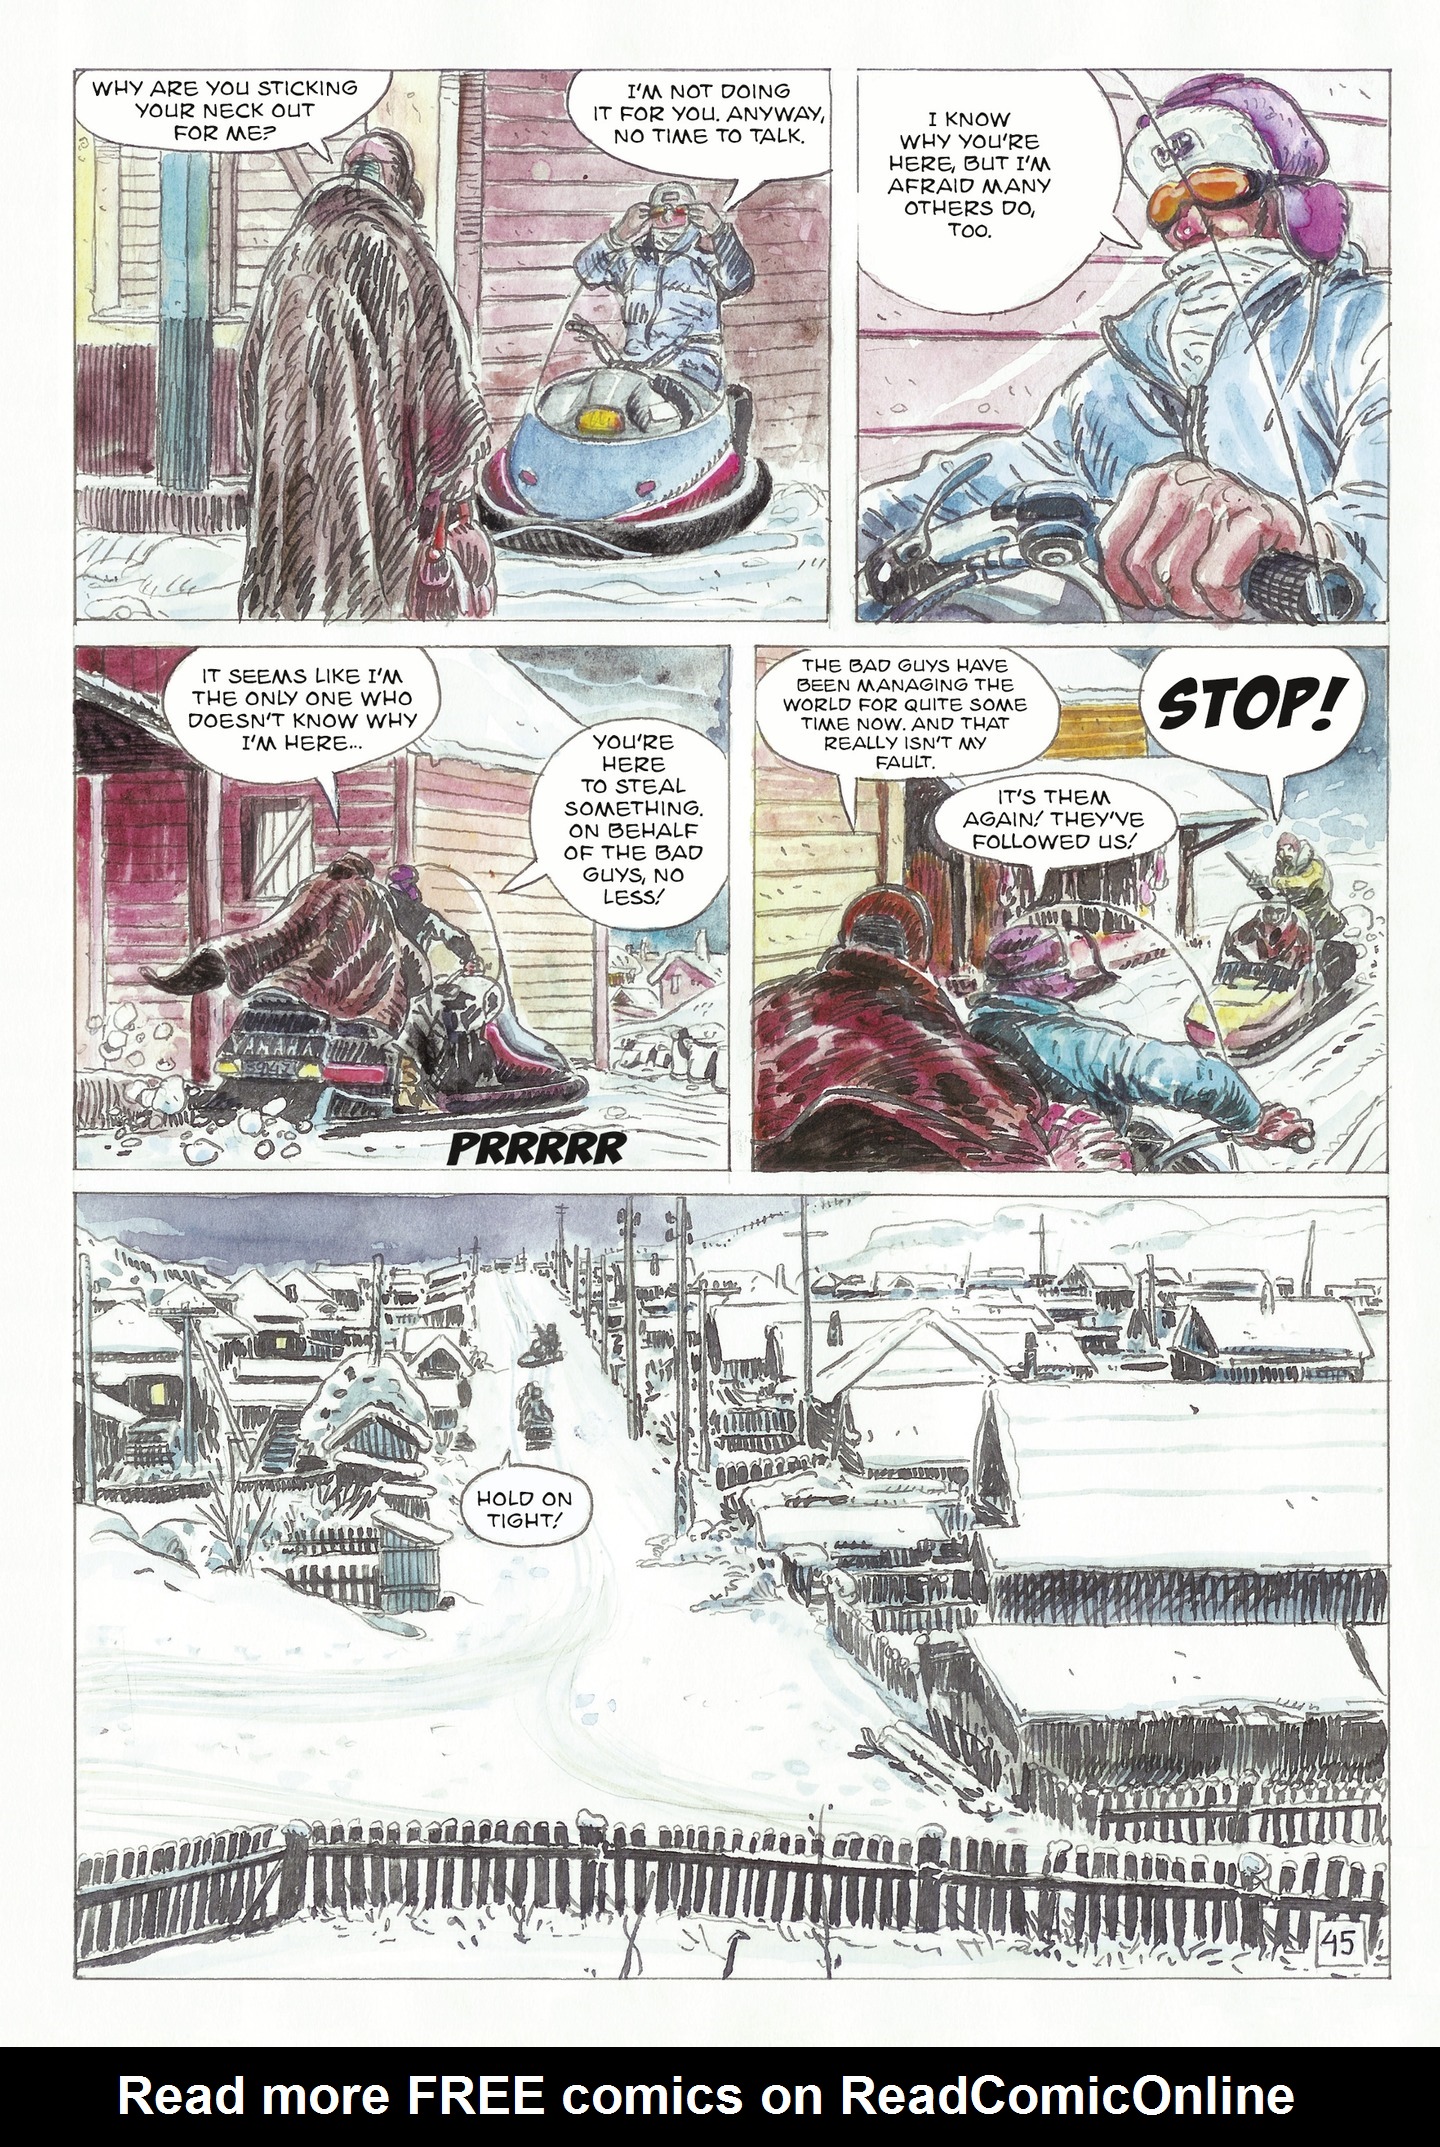 Read online The Man With the Bear comic -  Issue #1 - 47